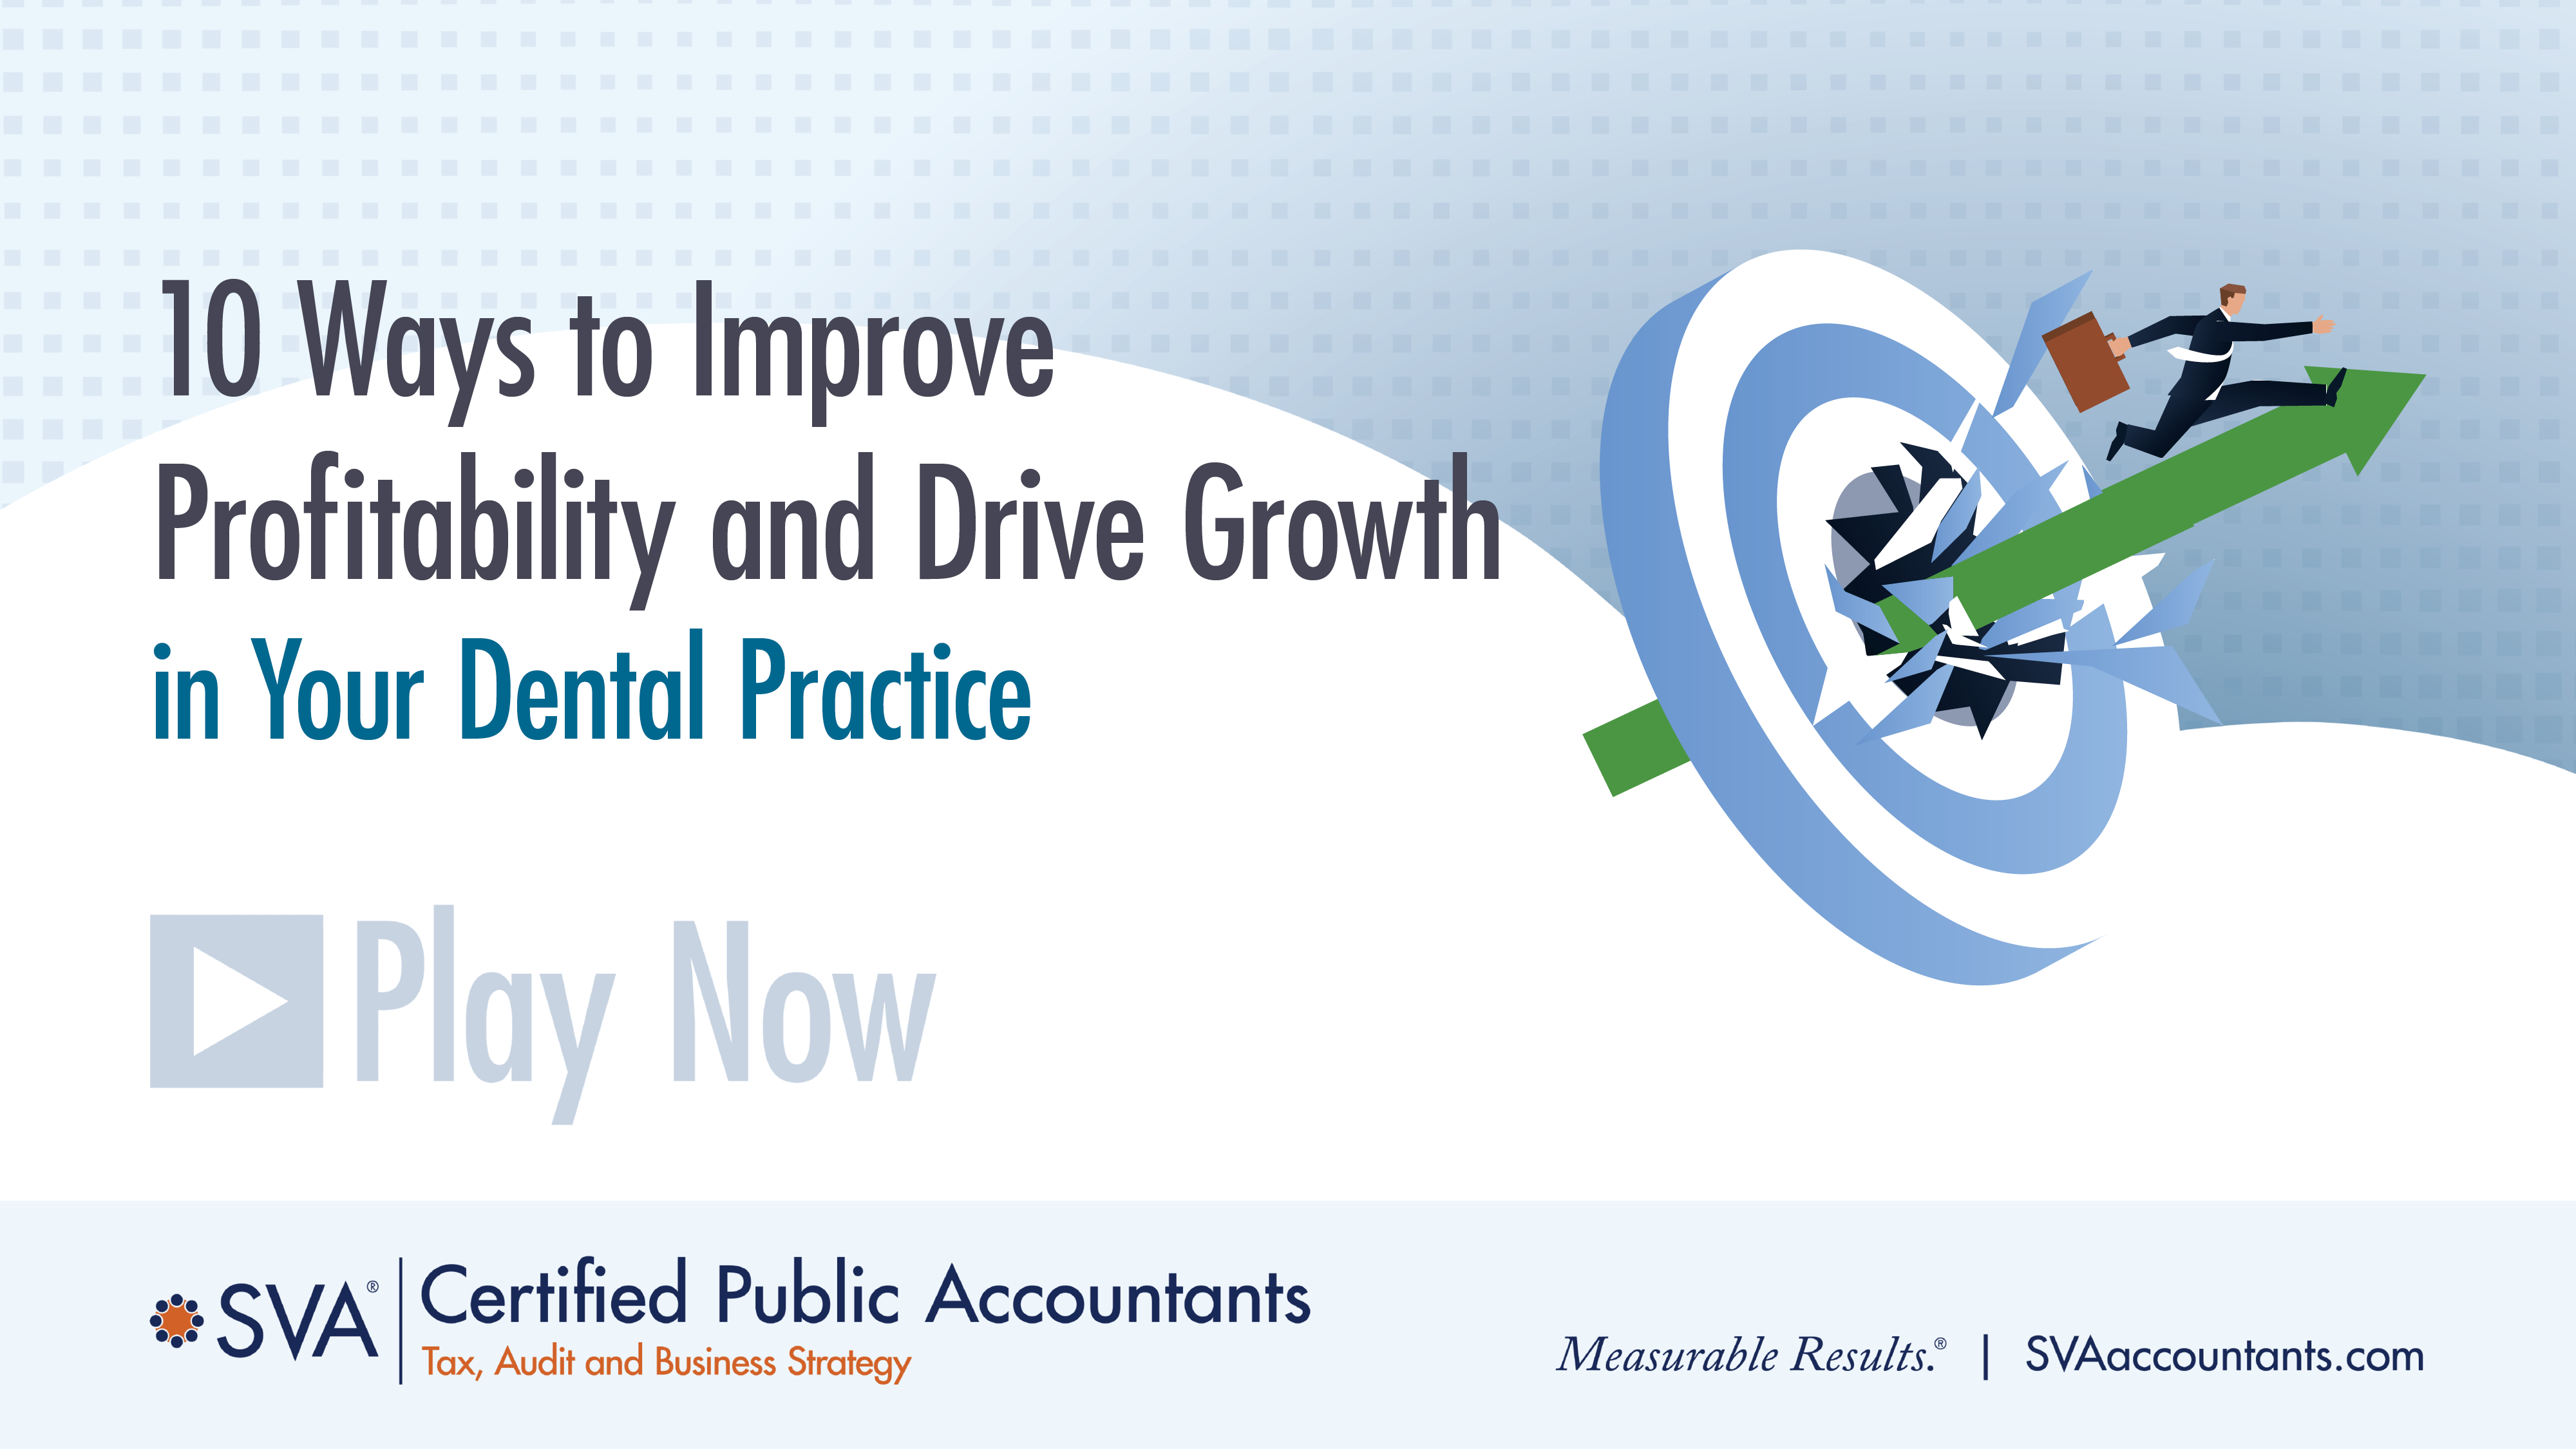 10 Ways to Improve Profitability and Growth in Your Dental Practice